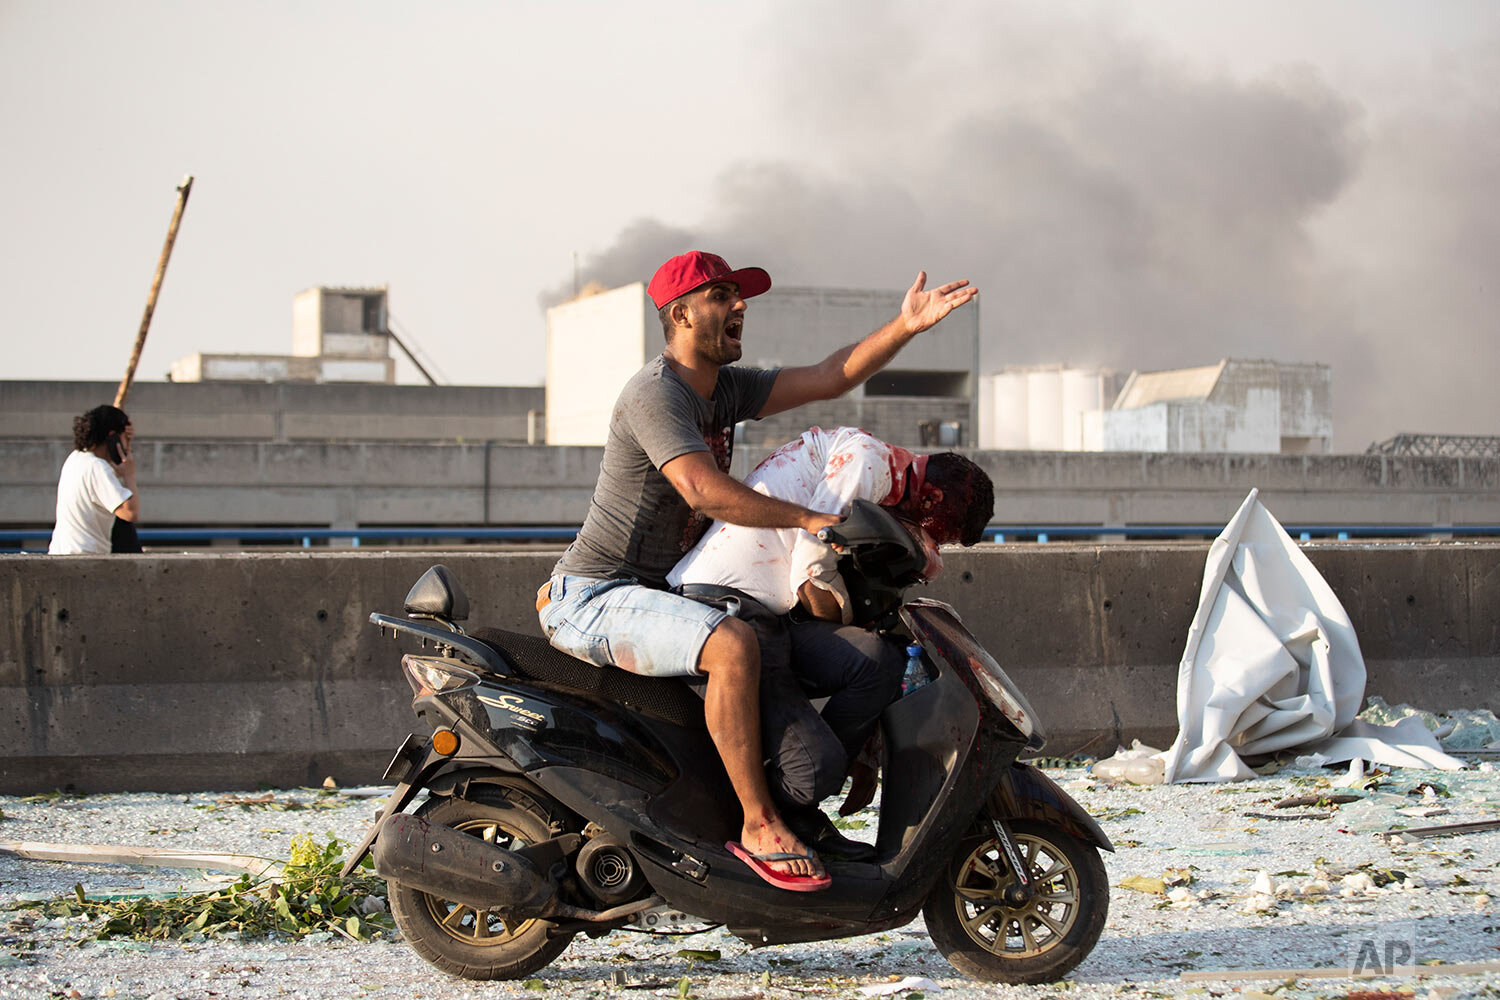  A man evacuates an injured person after a massive explosion in Beirut, Lebanon, Tuesday, Aug. 4, 2020. (AP Photo/Hassan Ammar) 